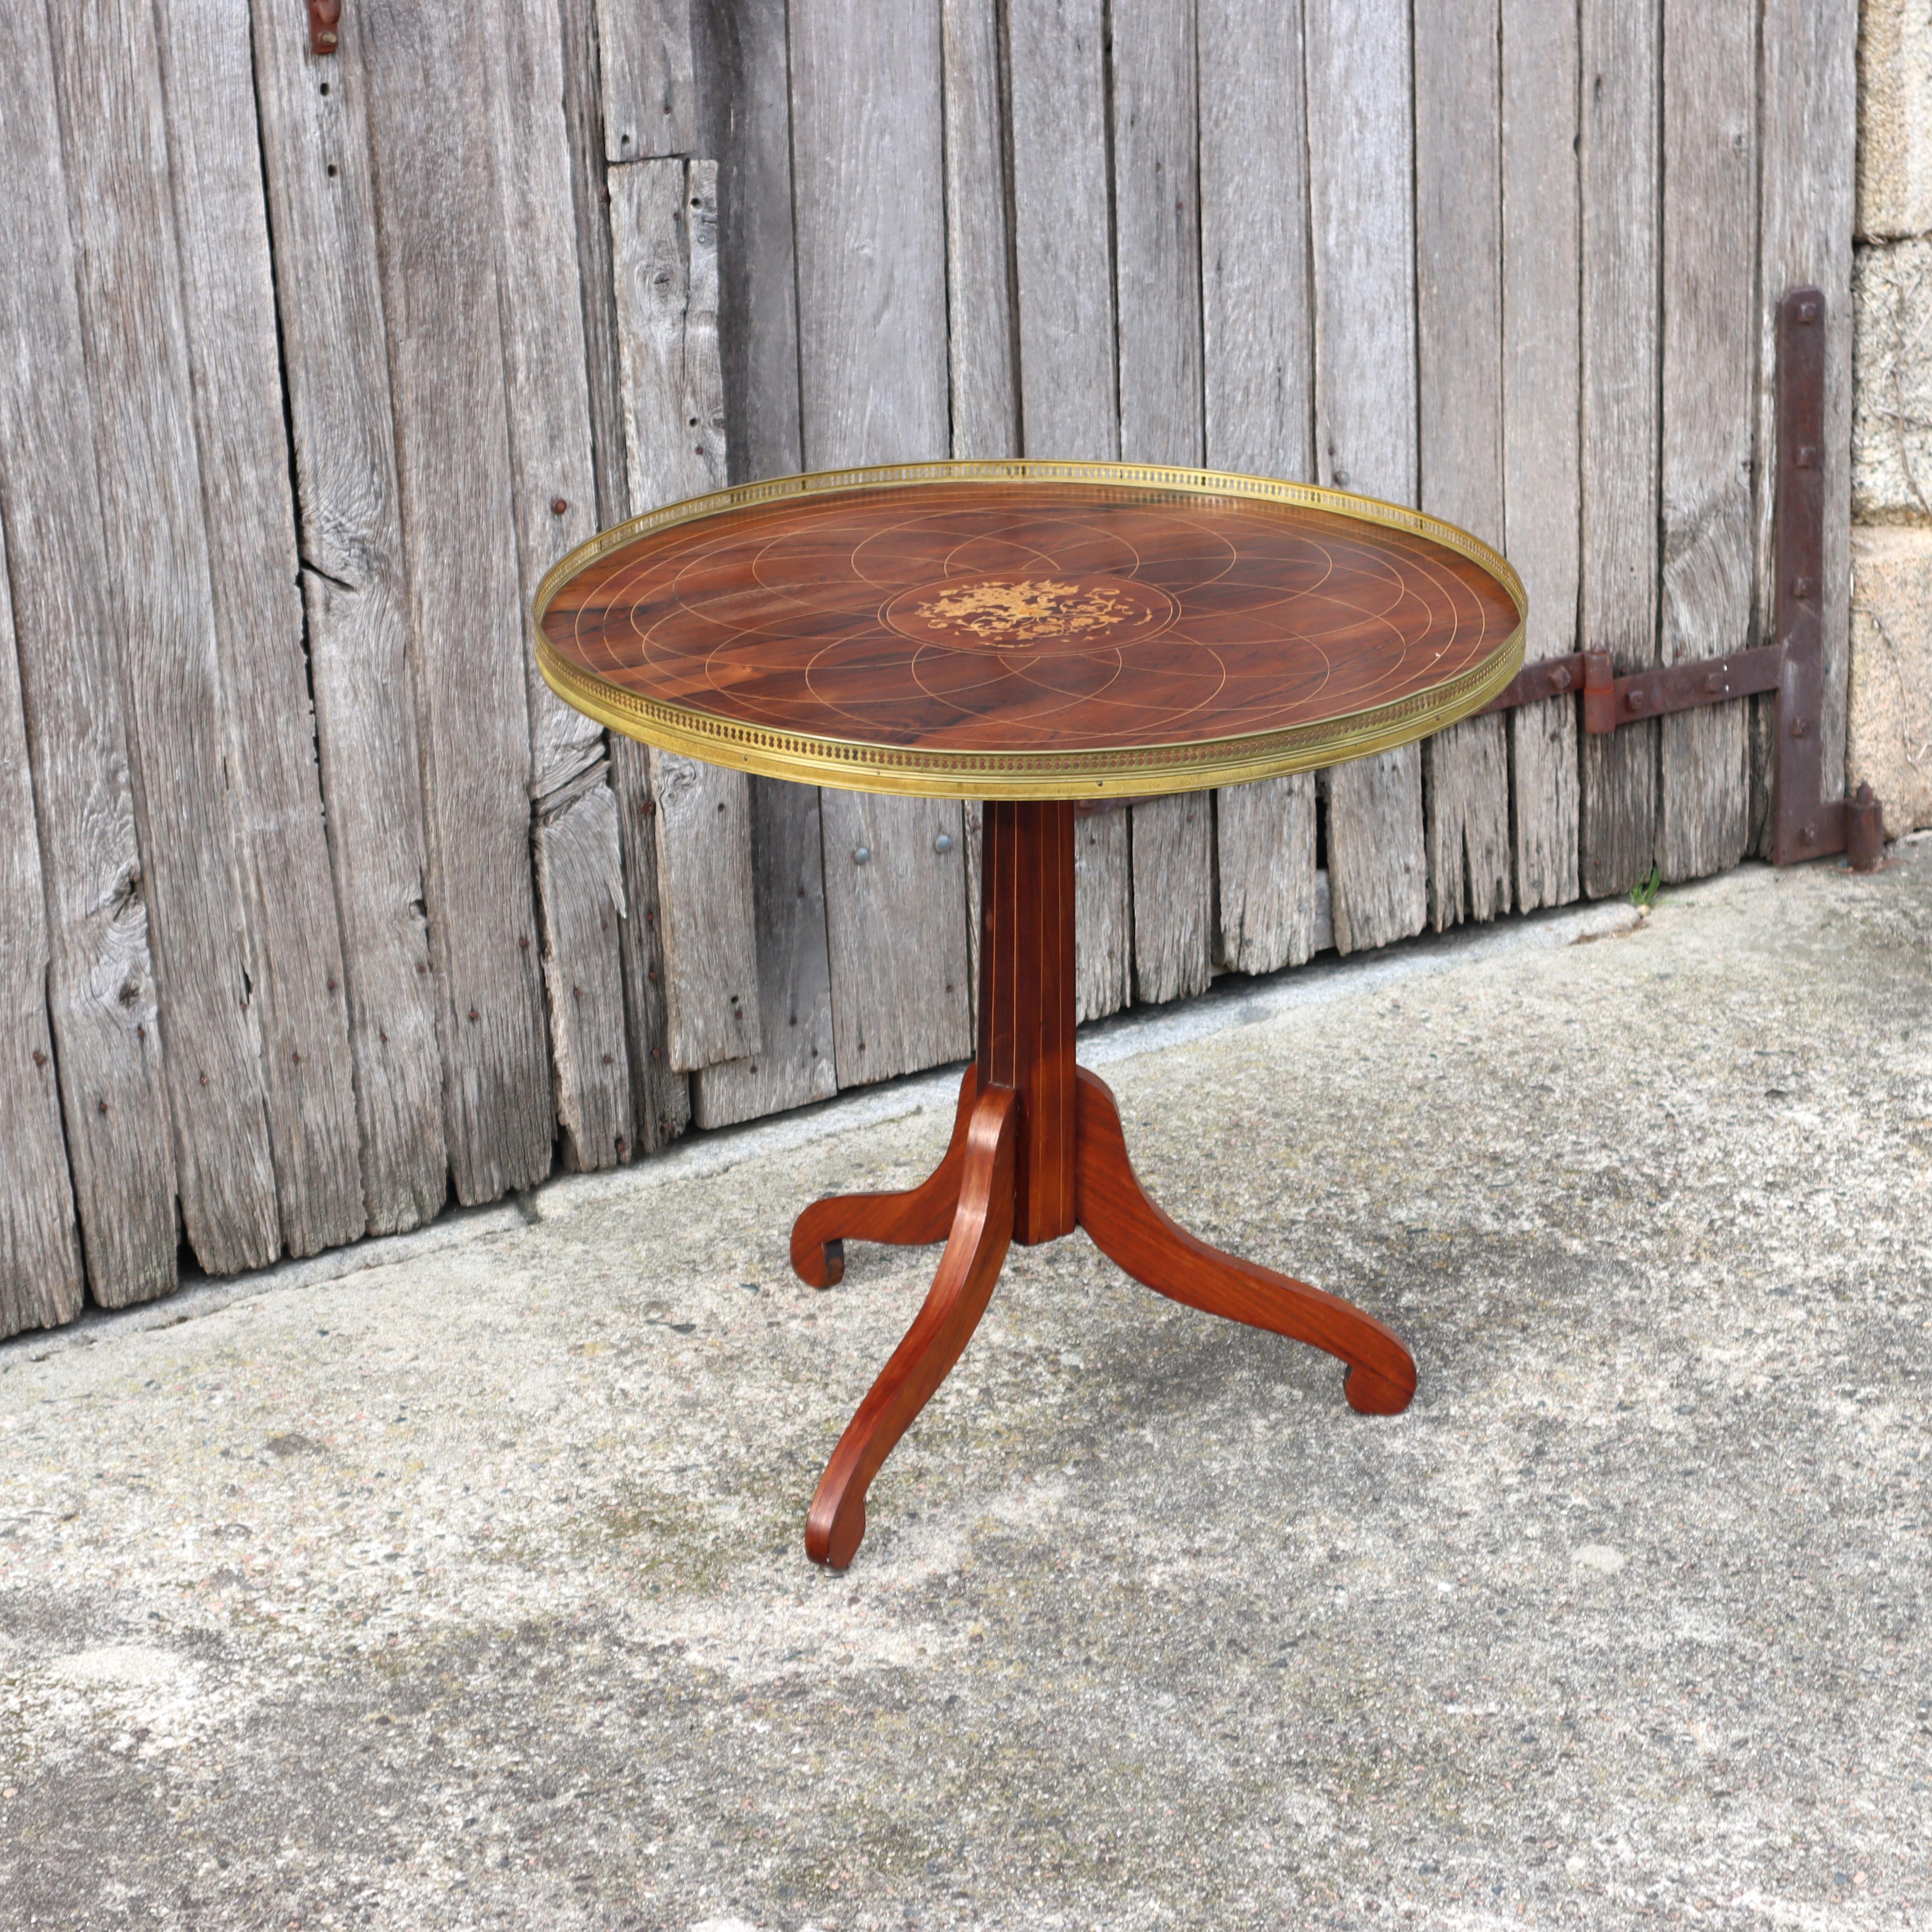 Beautiful french Pedestal Table Neoclassical Style from the 60s.
This big round Table Surface has a striking Wood Grain,
The Table Top is decorated with artistic Inlay work with floral motifs in the Center.
The Edge of the Table is decorated all